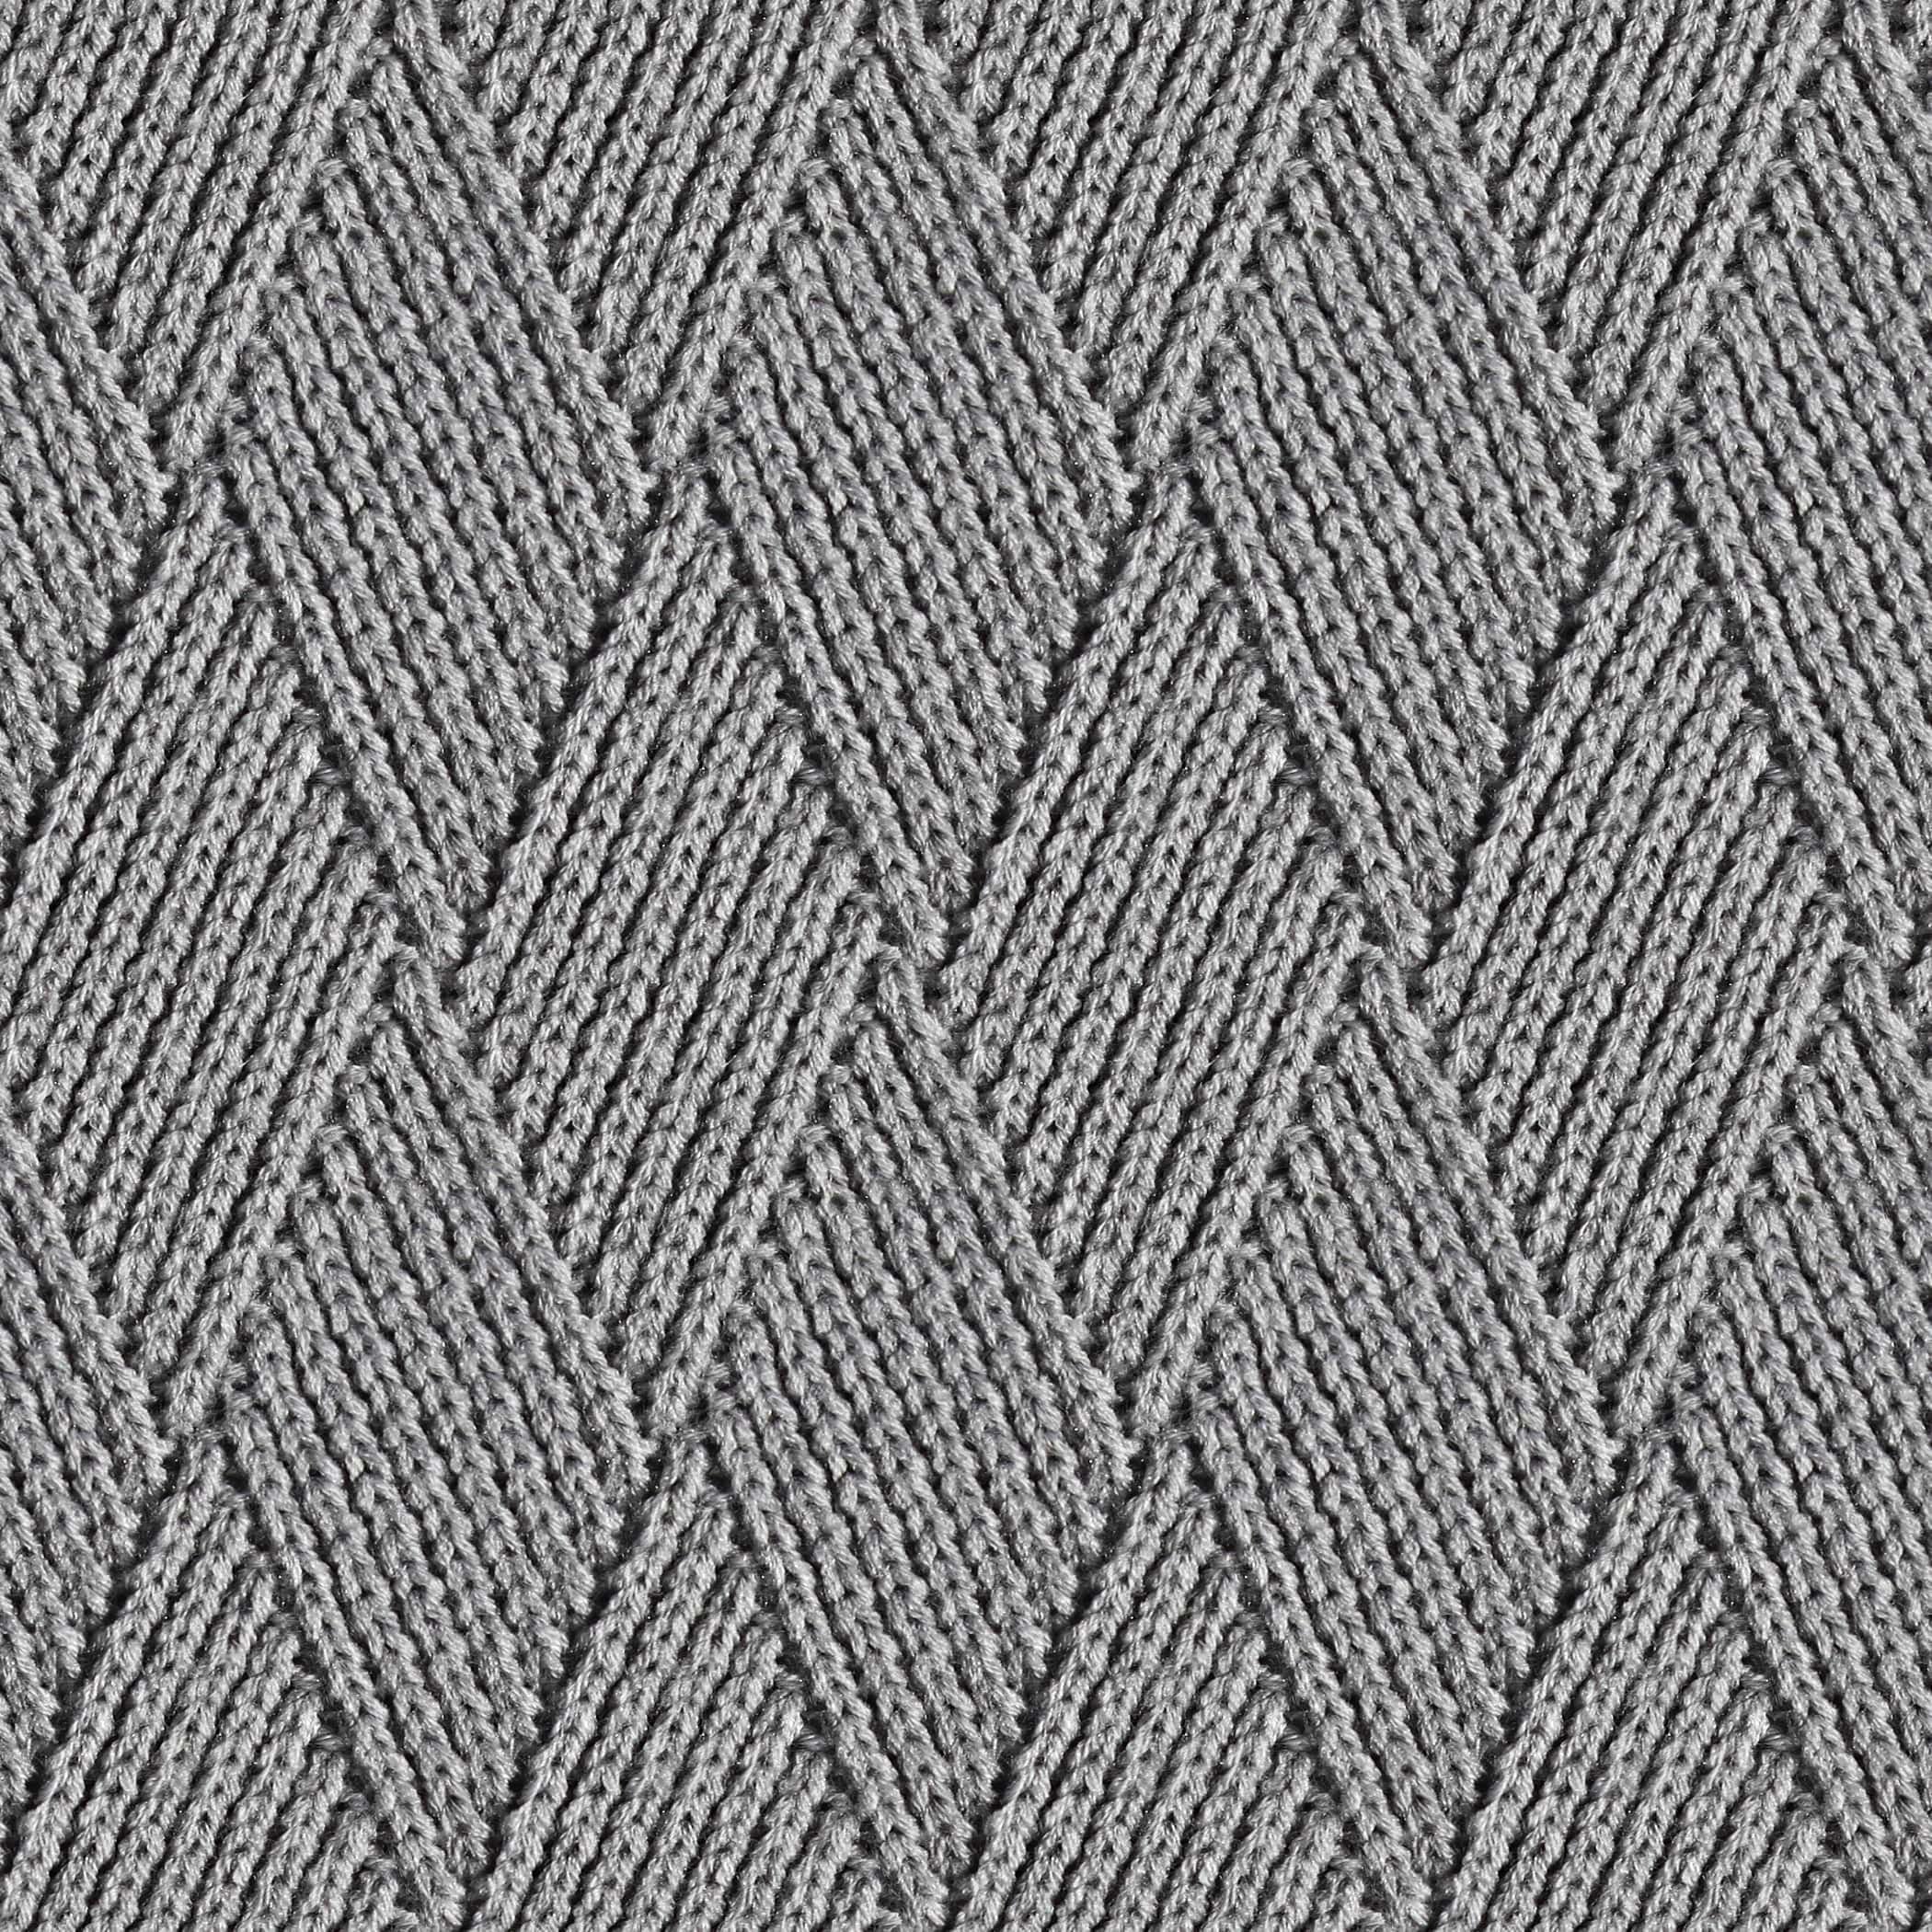 Diamond pattern knitted scarf – Free Seamless Textures - All rights reseved